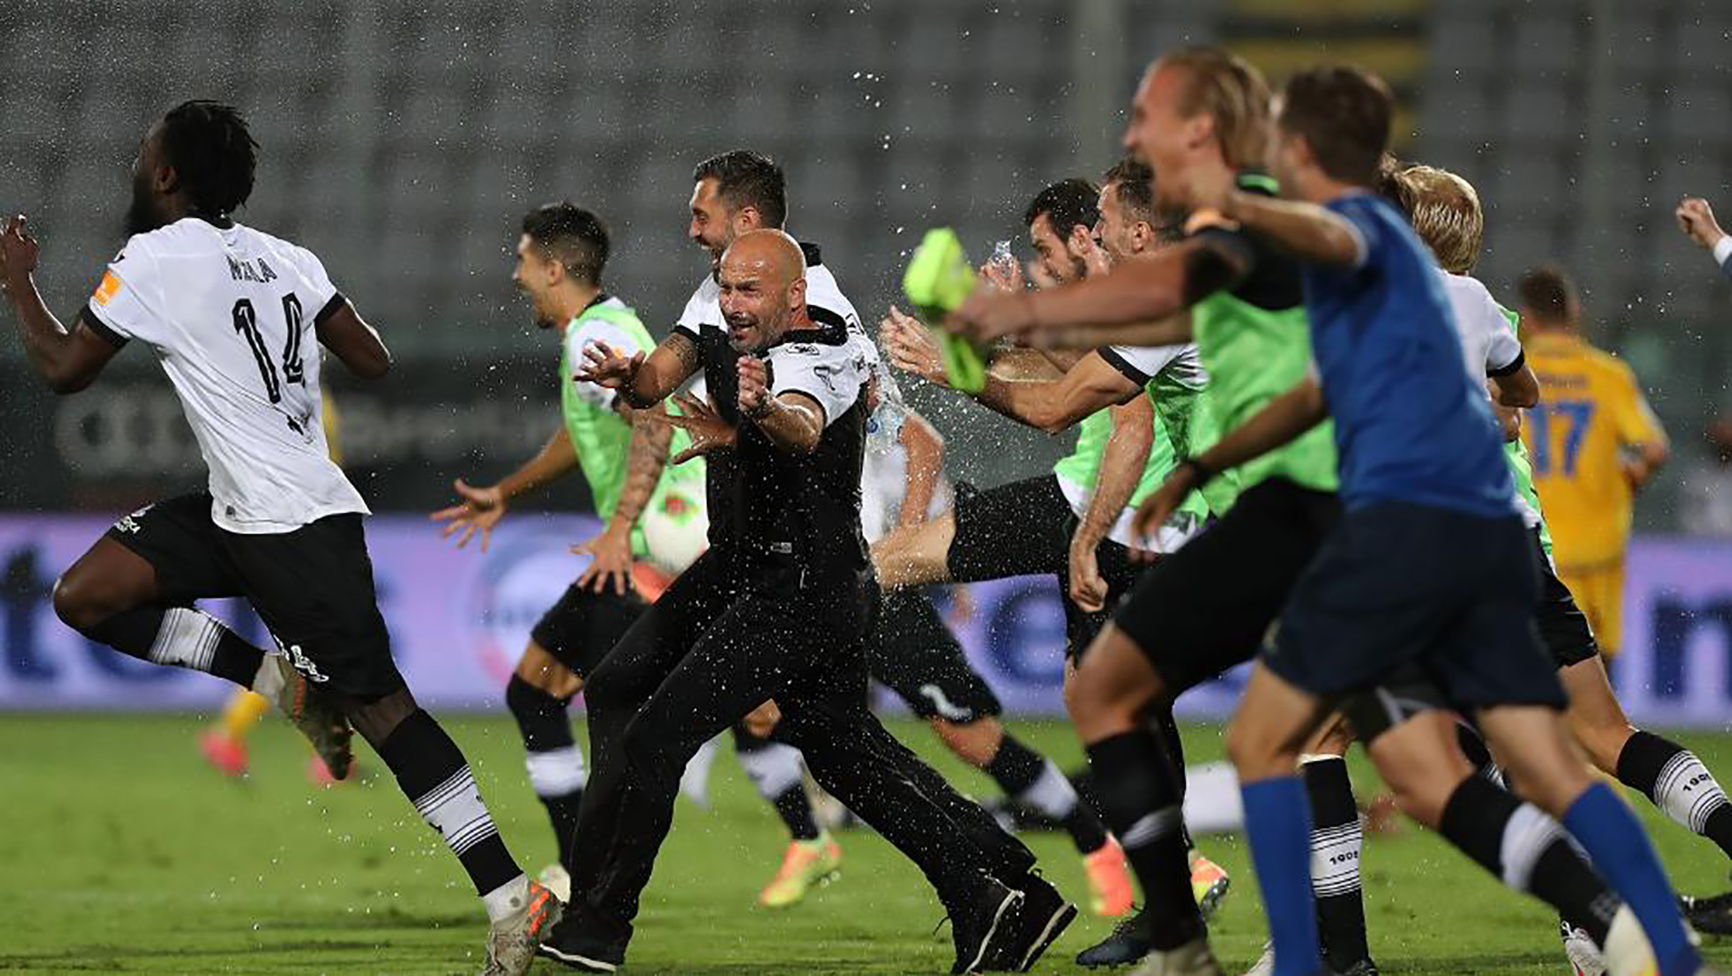 Watch: Spezia soar into Serie A for first time in 114-year history - SportsDesk